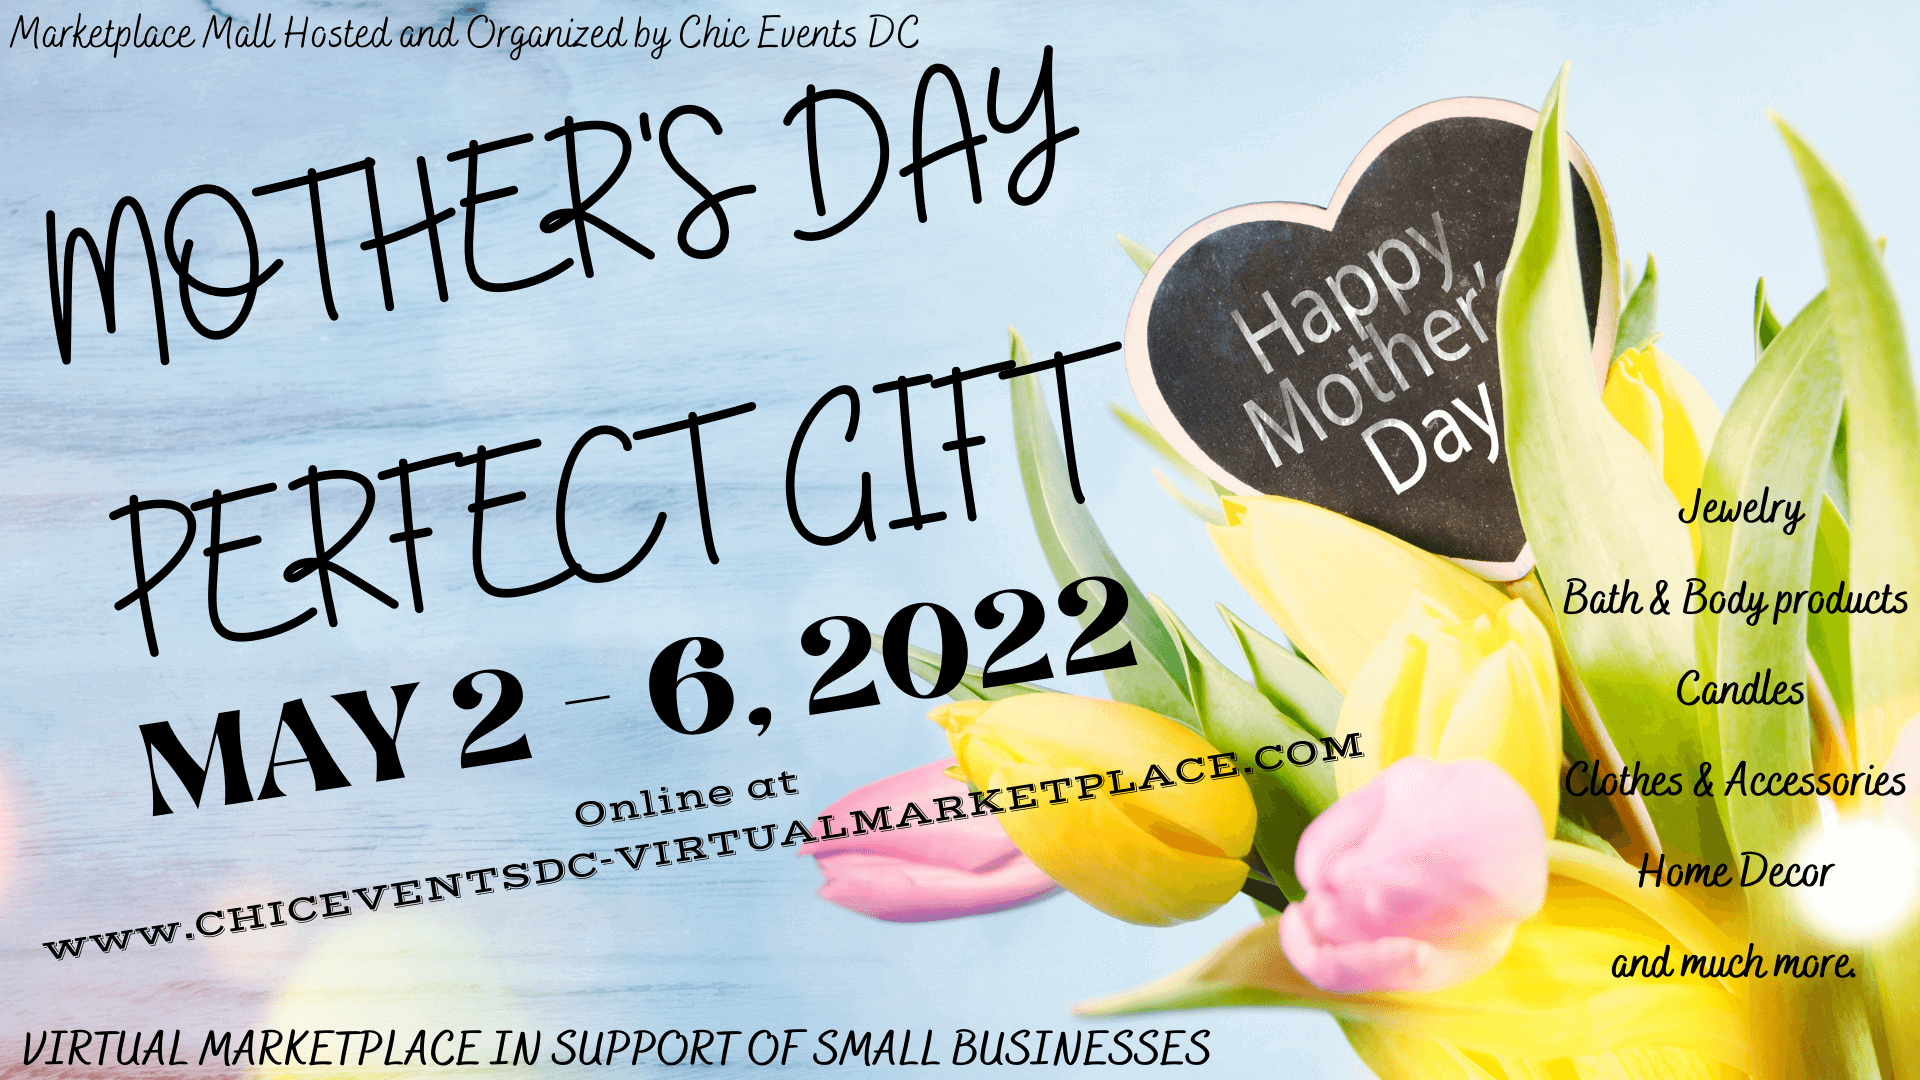 Mother's Day Celebration - Virtual Marketplace Mall, Online Event